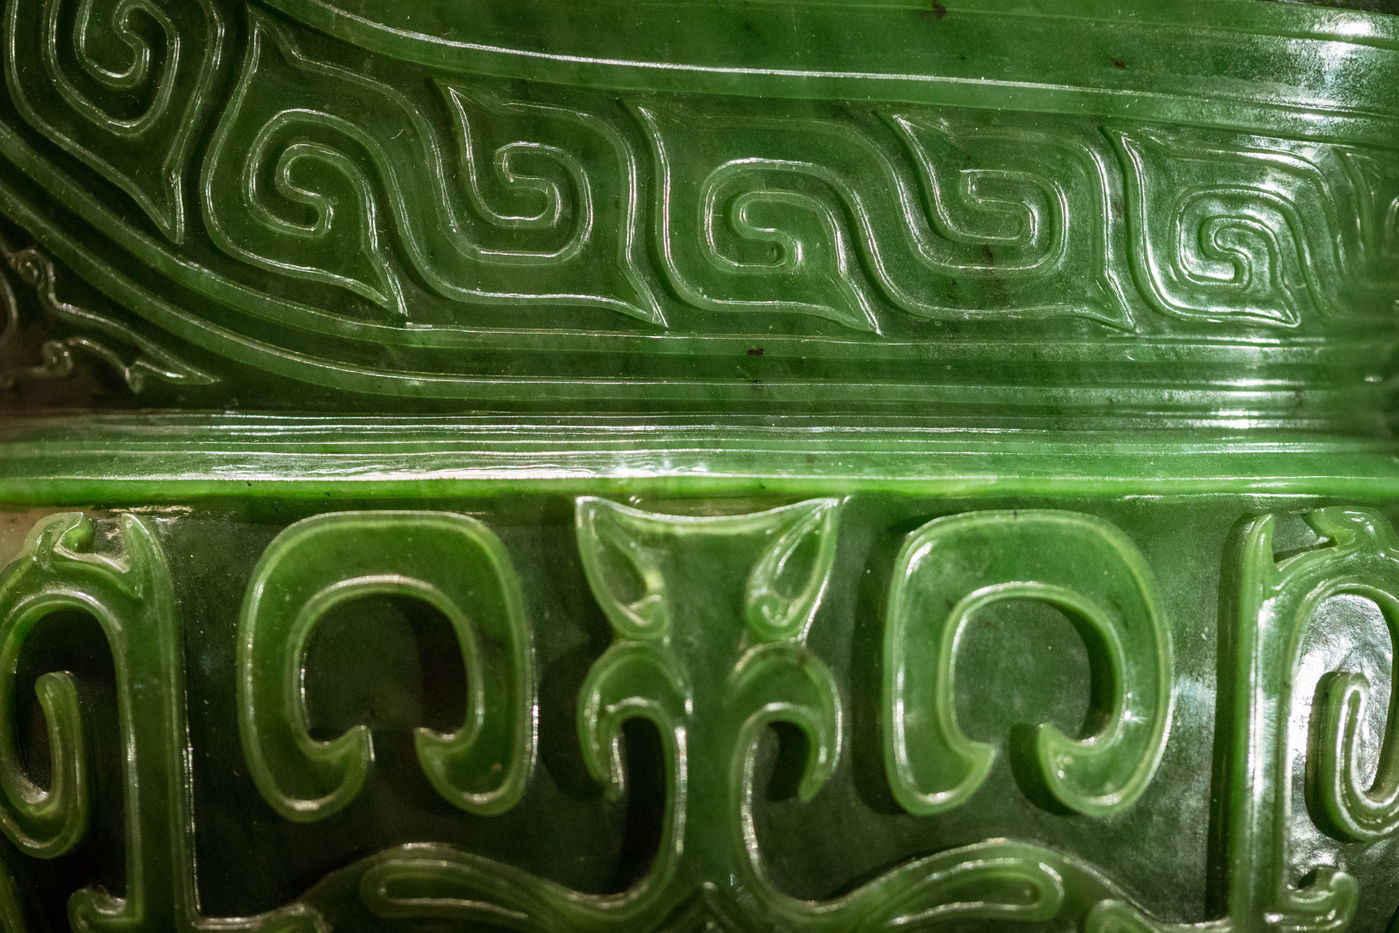 Jade can be carved with detailed patterns. This design from the Qing period (AD 1644–1911) takes inspiration from ancient Bronze Age vessels.